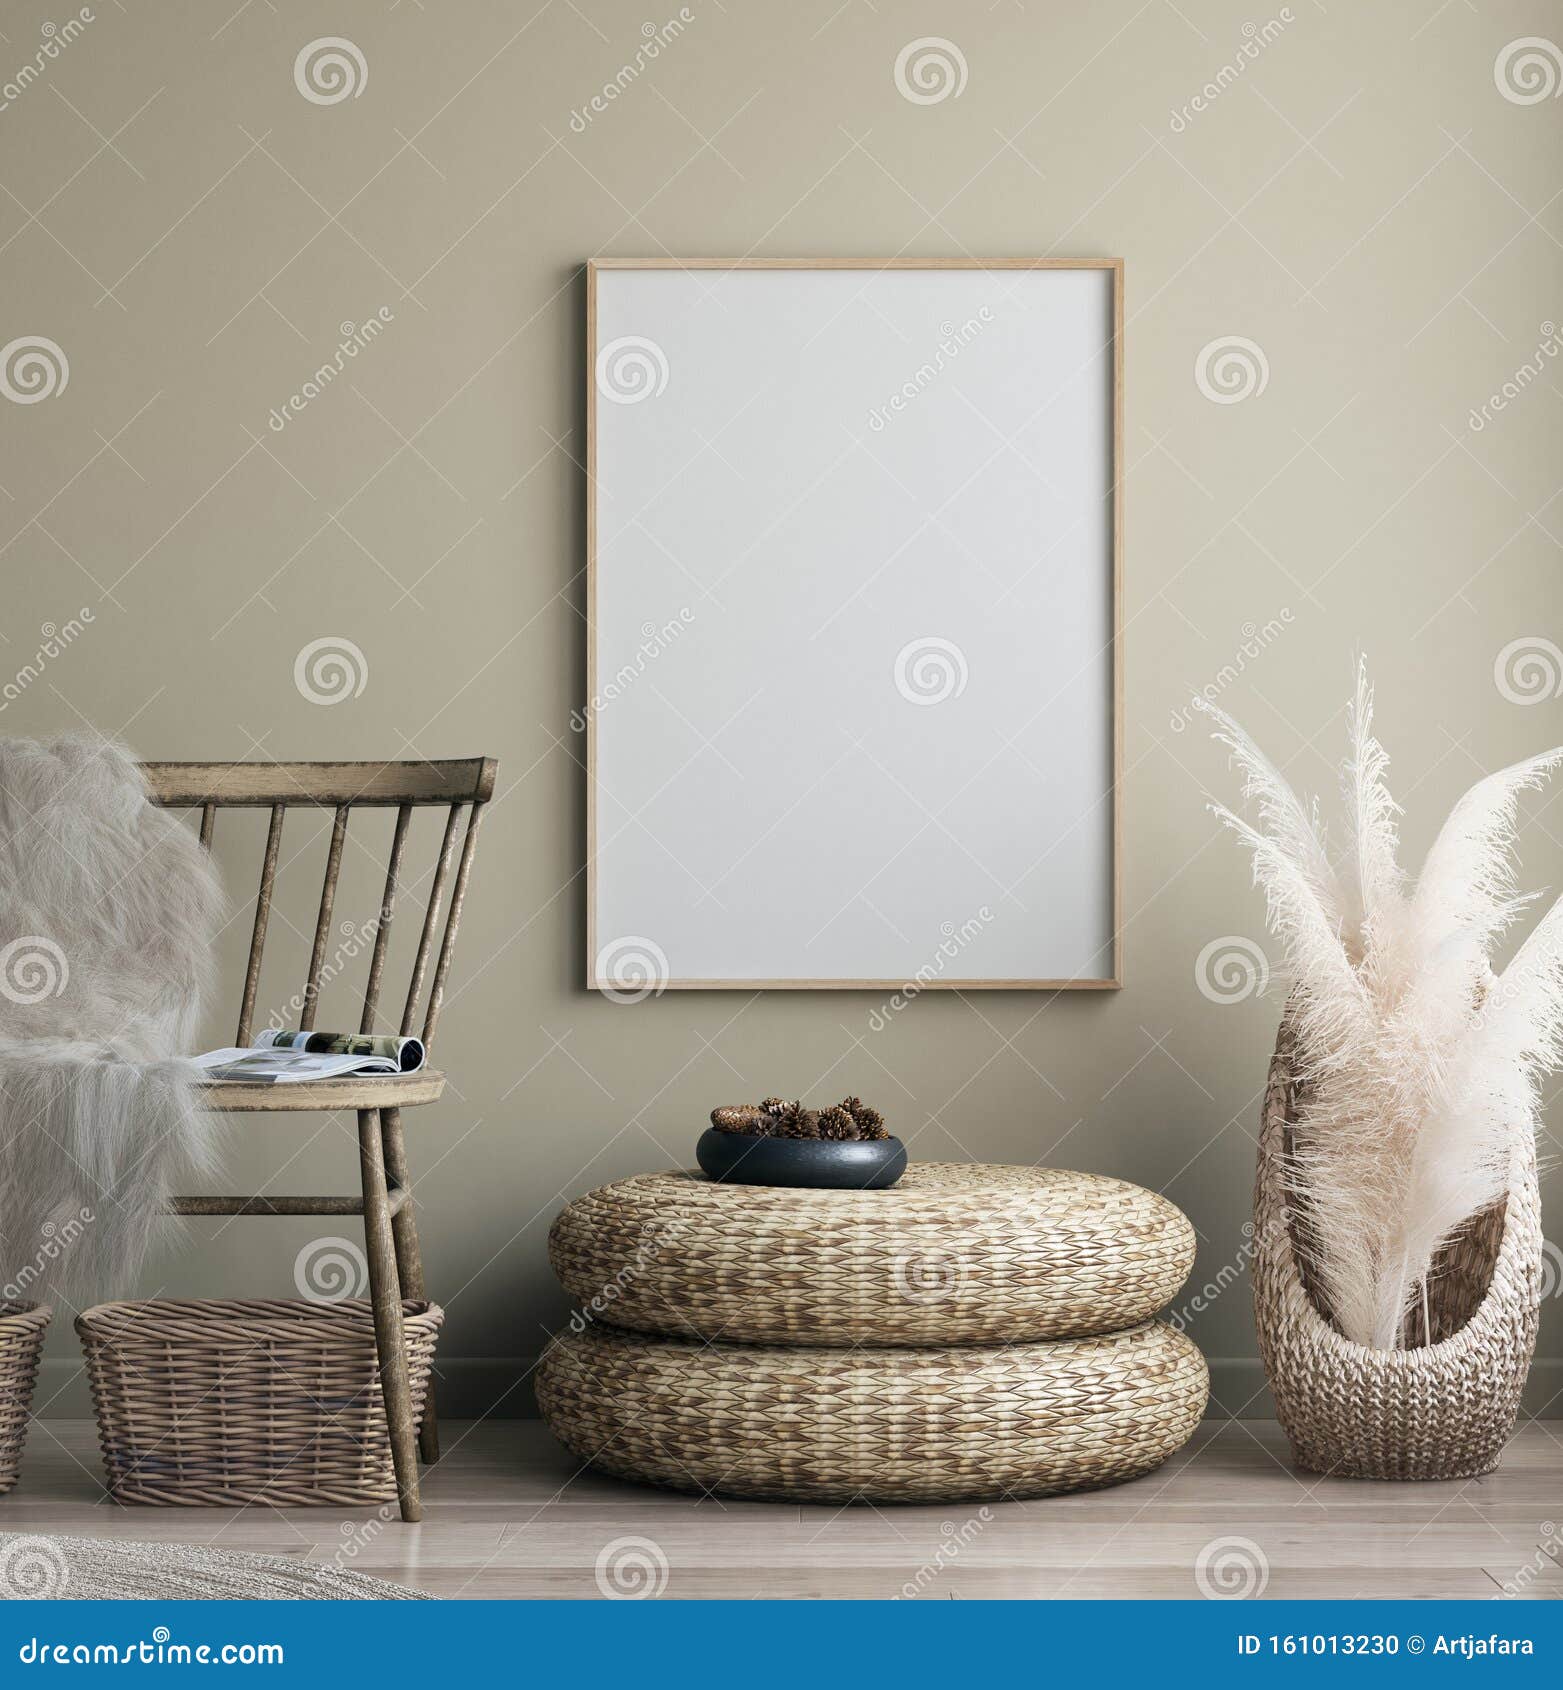 poster mock up in home interior with old bench, scandinavian bohemian style